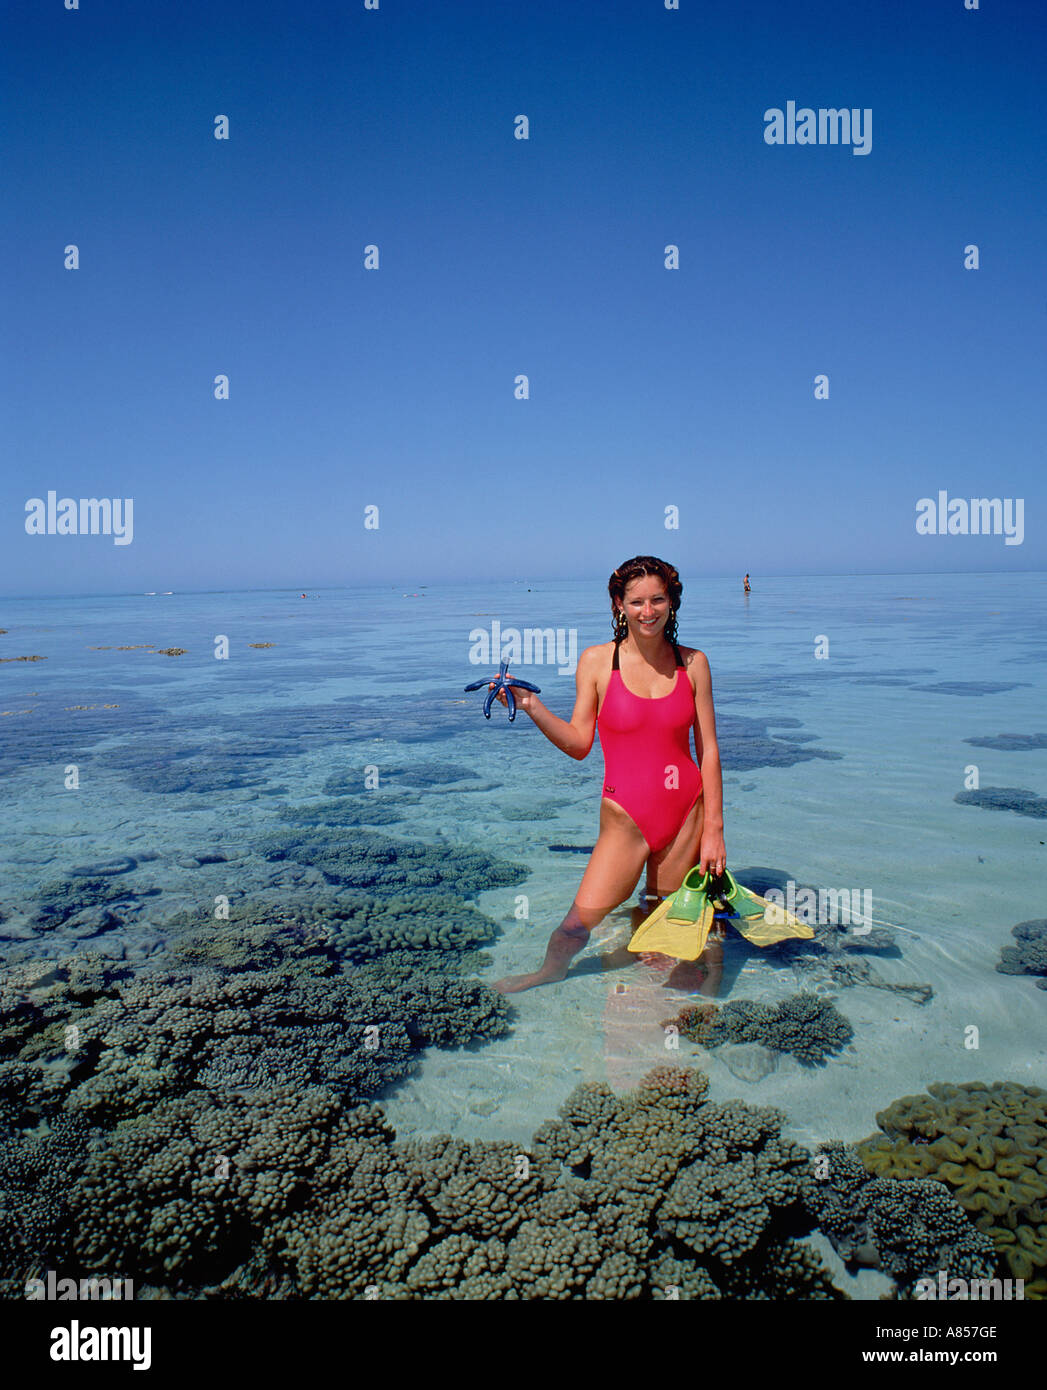 Australia. Queensland. Great Barrier Reef. Snorkeling. Young woman in swimsuit standing in shallow water, holding a starfish. Stock Photo